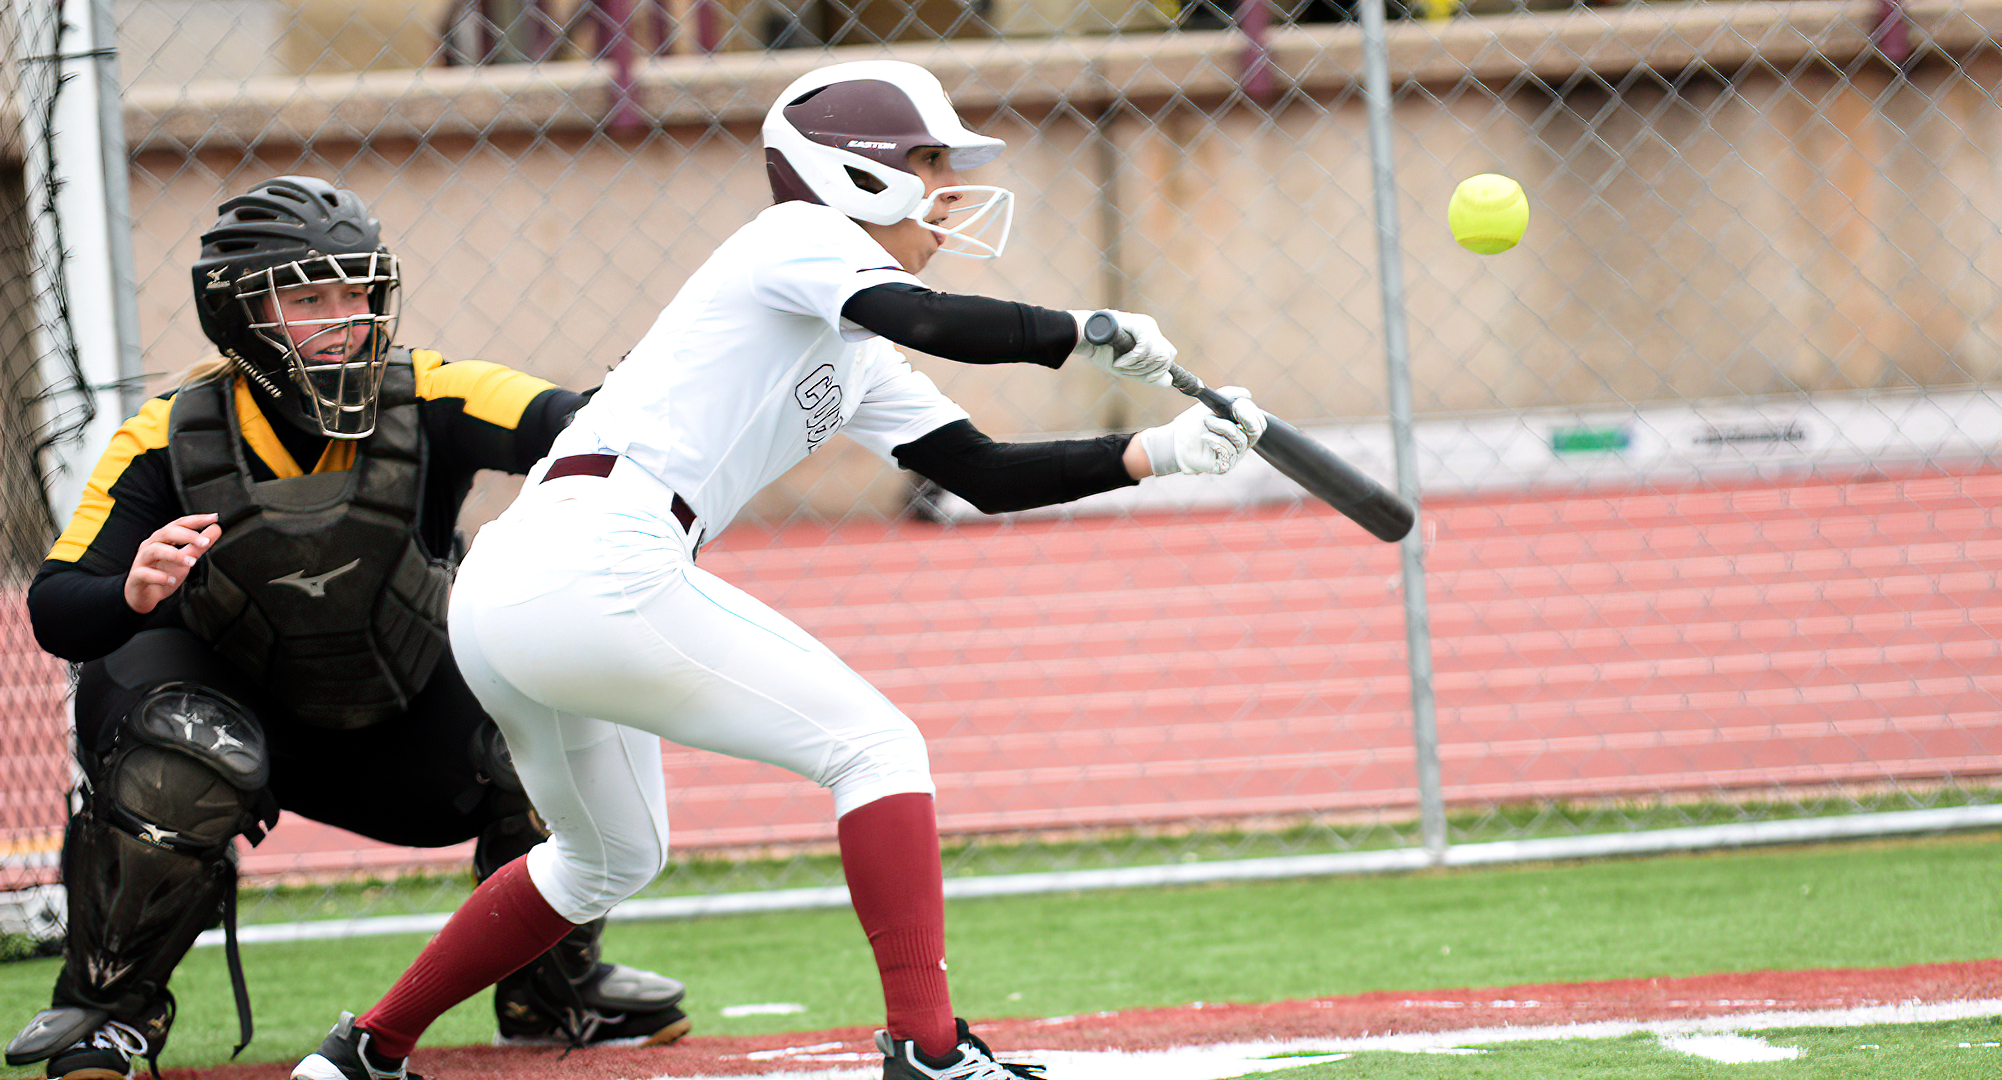 Freshman Rosie Unglaub lays down a bunt in the Cobbers' first game vs. Gustavus. She had a season-high three hits and stole three bases.